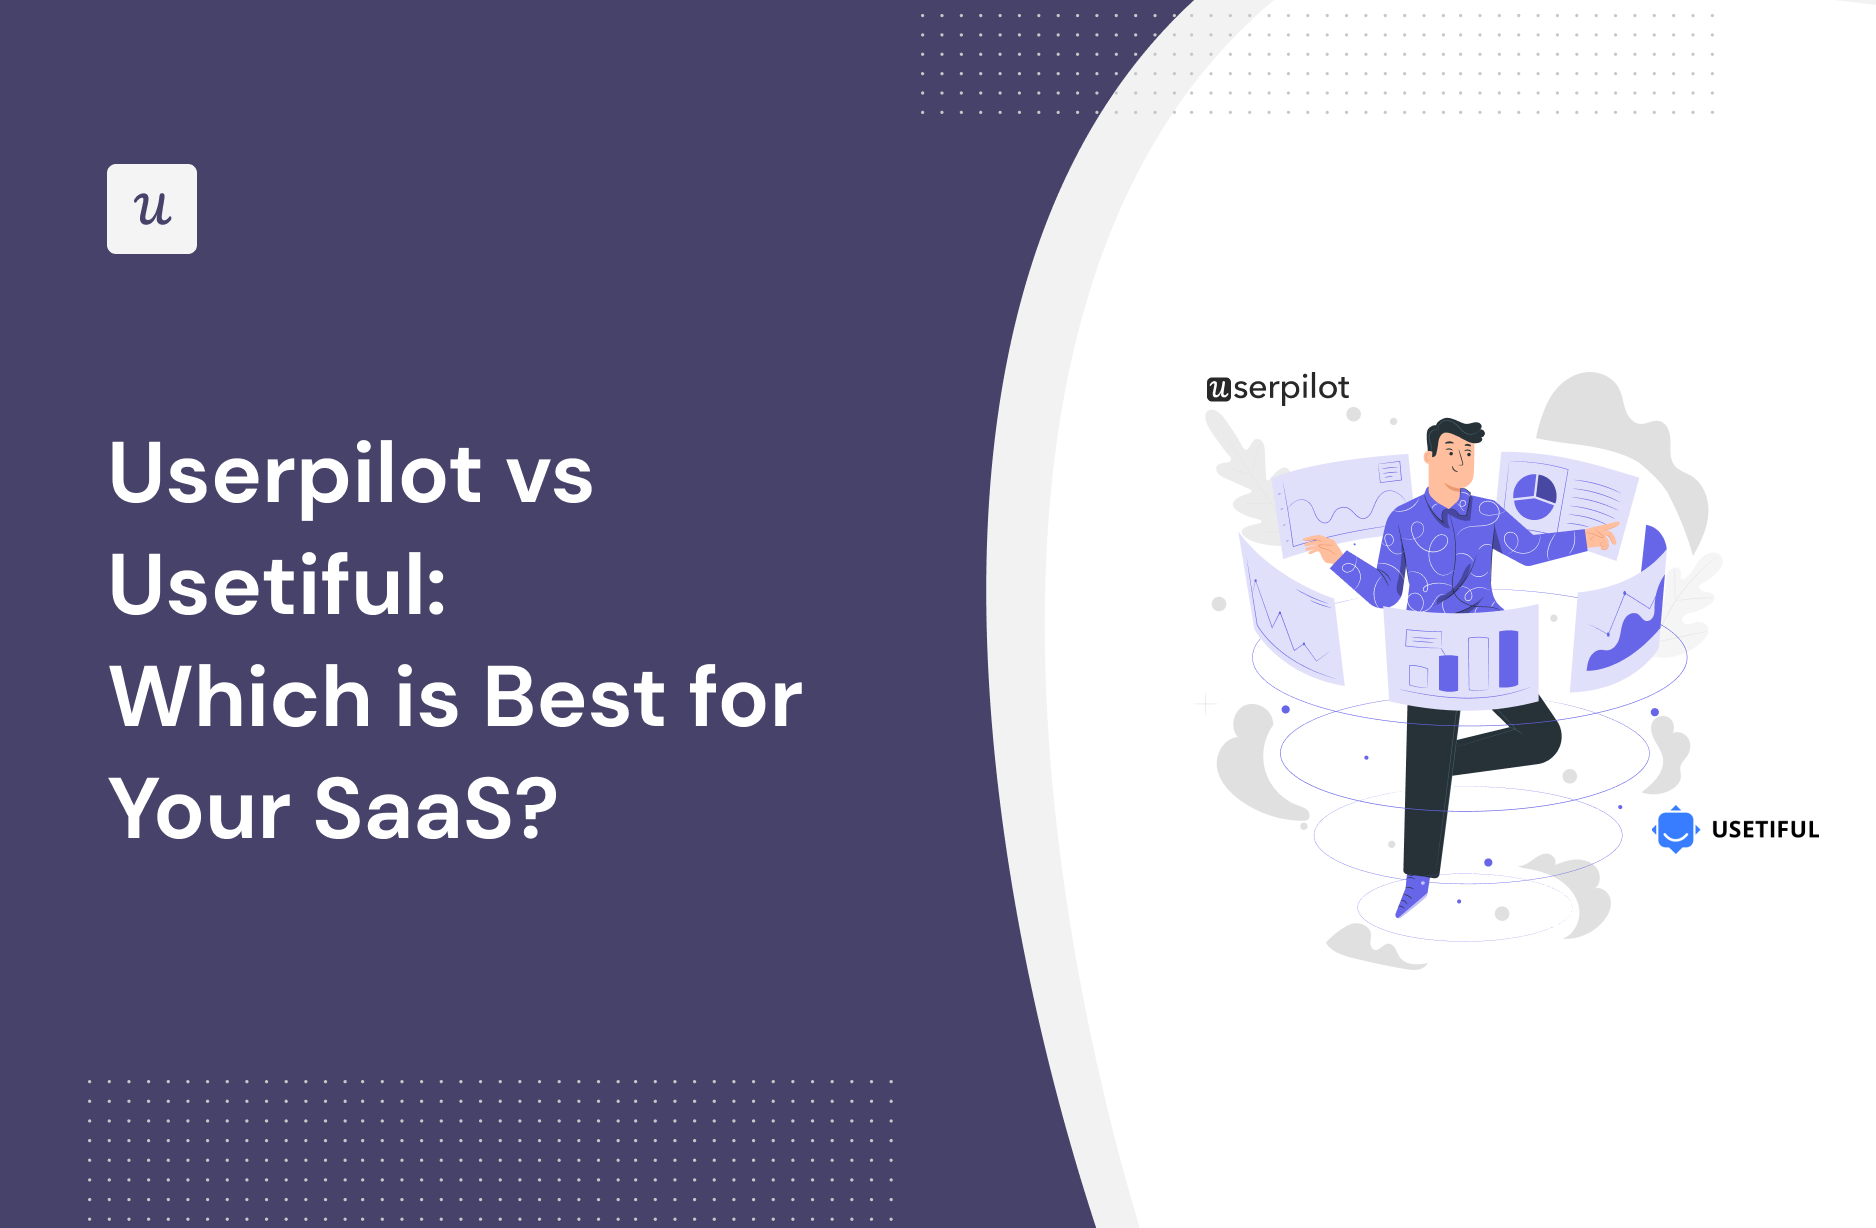 Userpilot vs Usetiful: Which Is Best for Your SaaS?